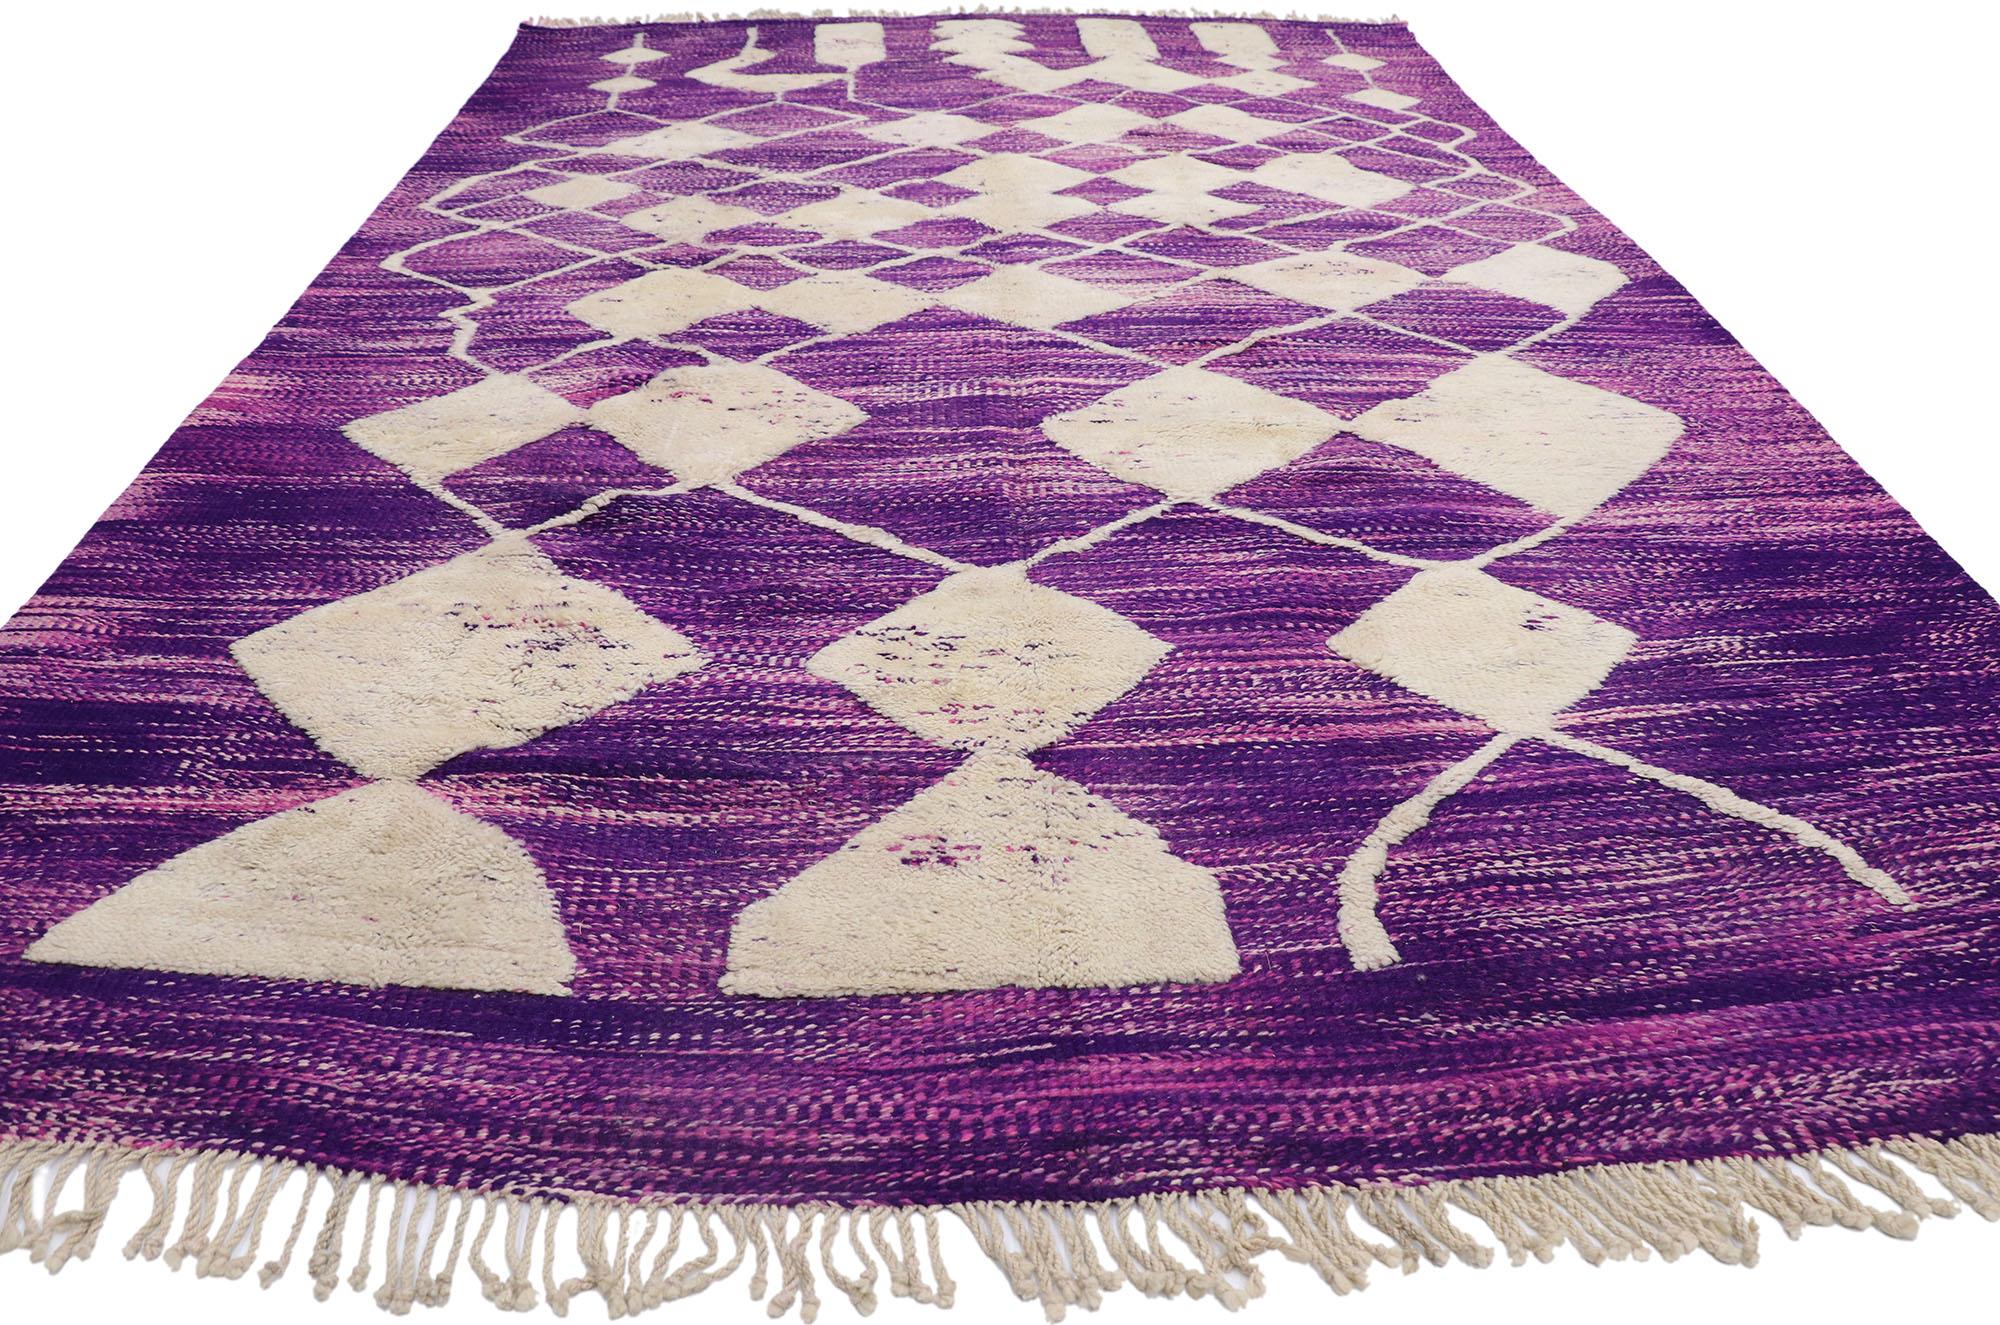 Tribal New Contemporary Berber Moroccan Souf Kilim Rug with Bohemian Style For Sale